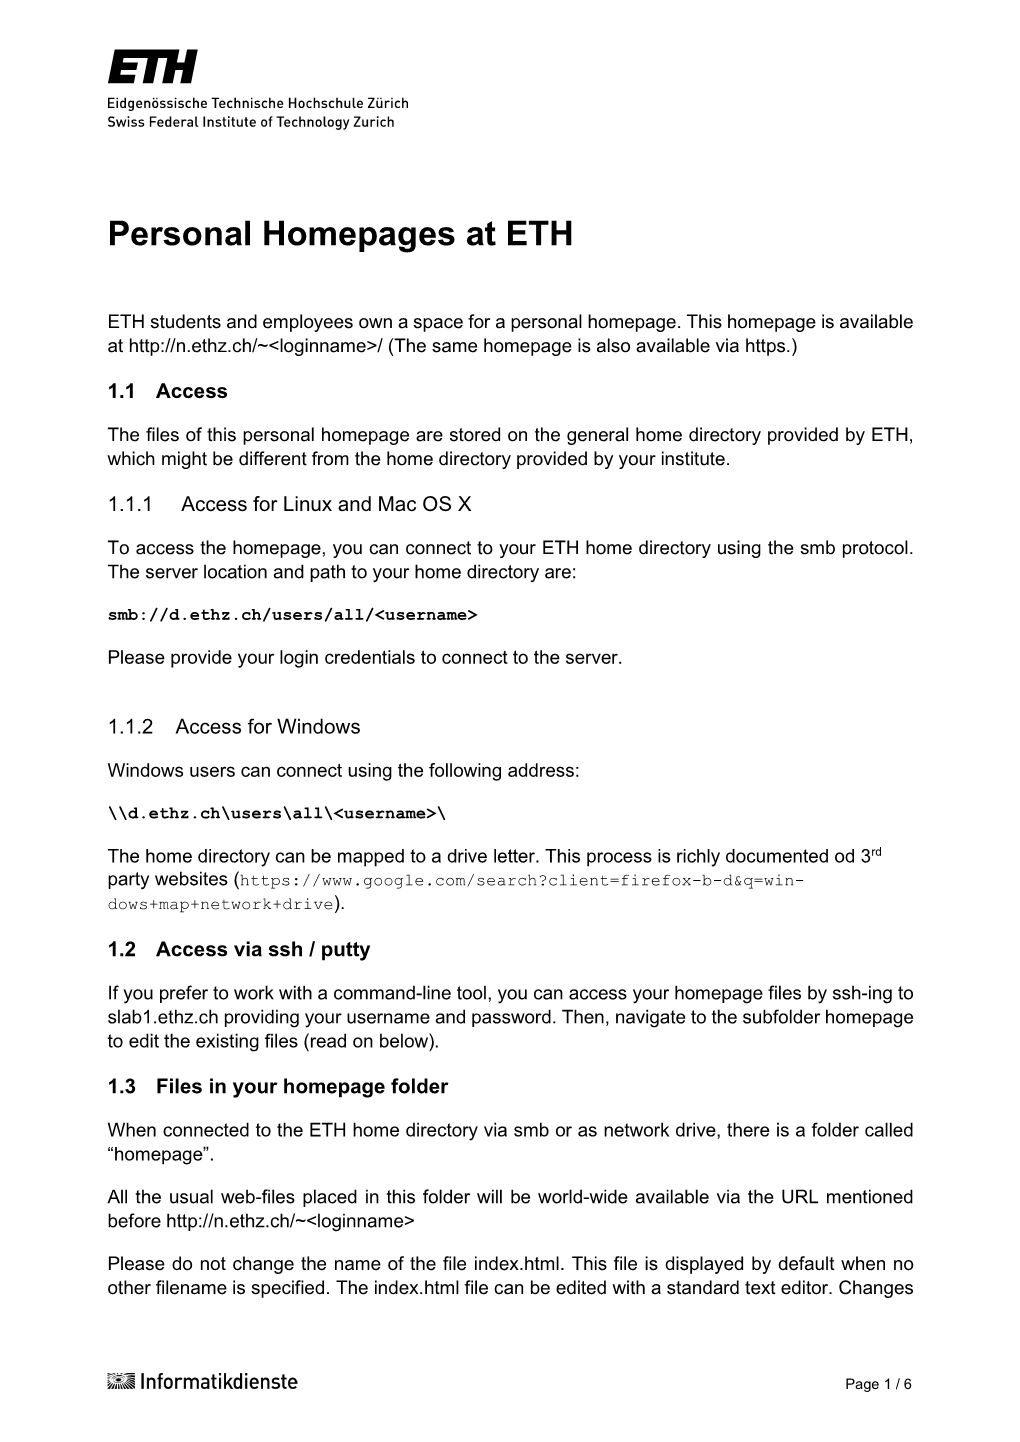 Personal Homepages at ETH